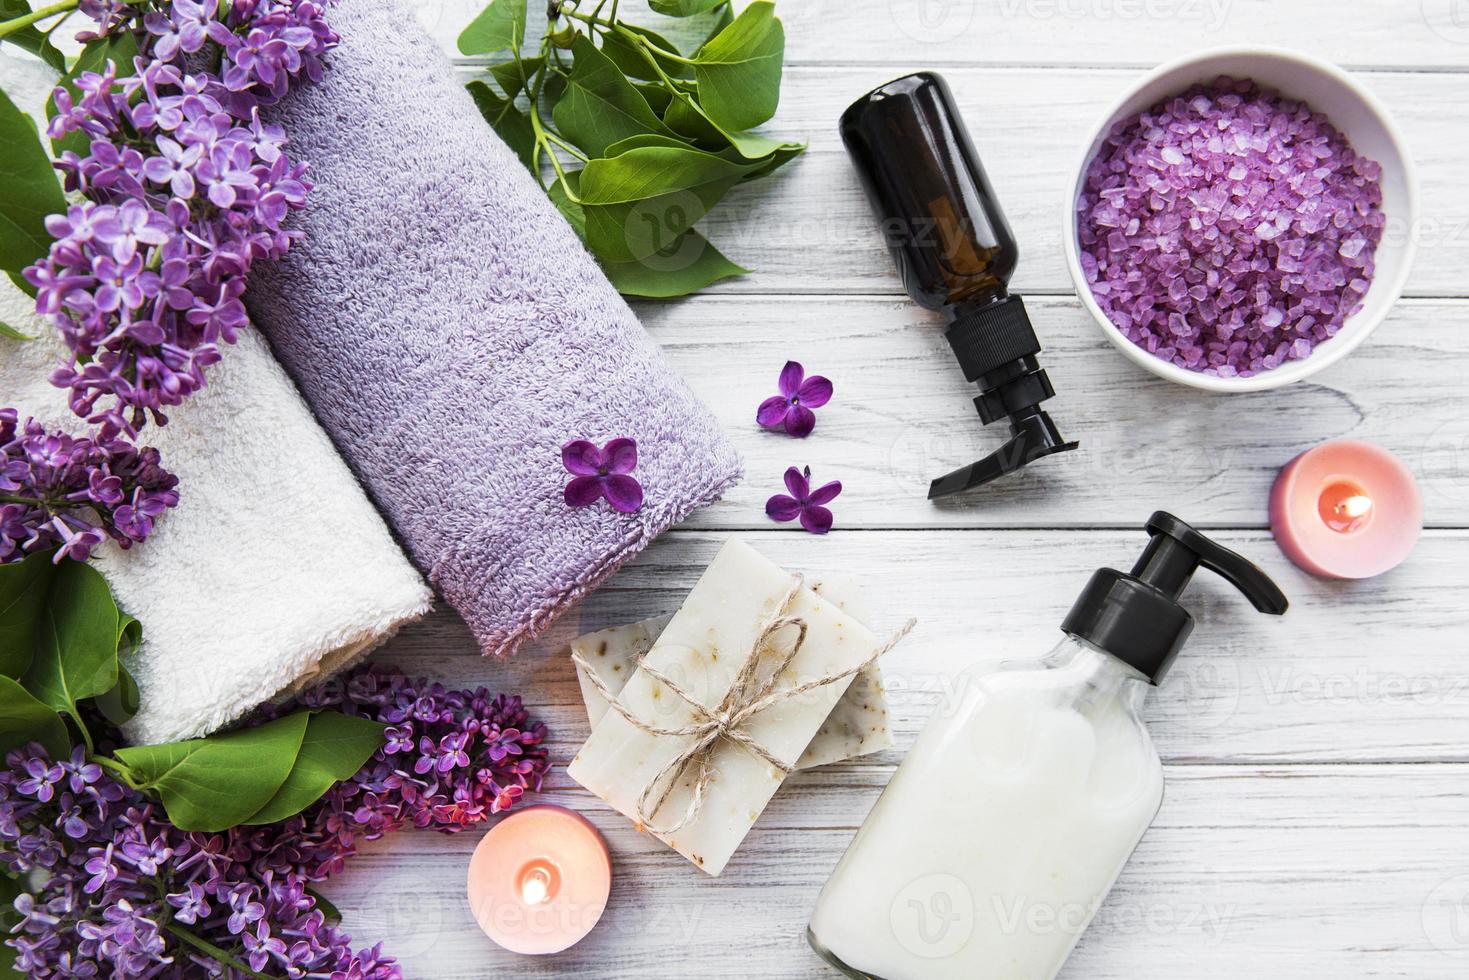 Spa setting with lilac flowers photo